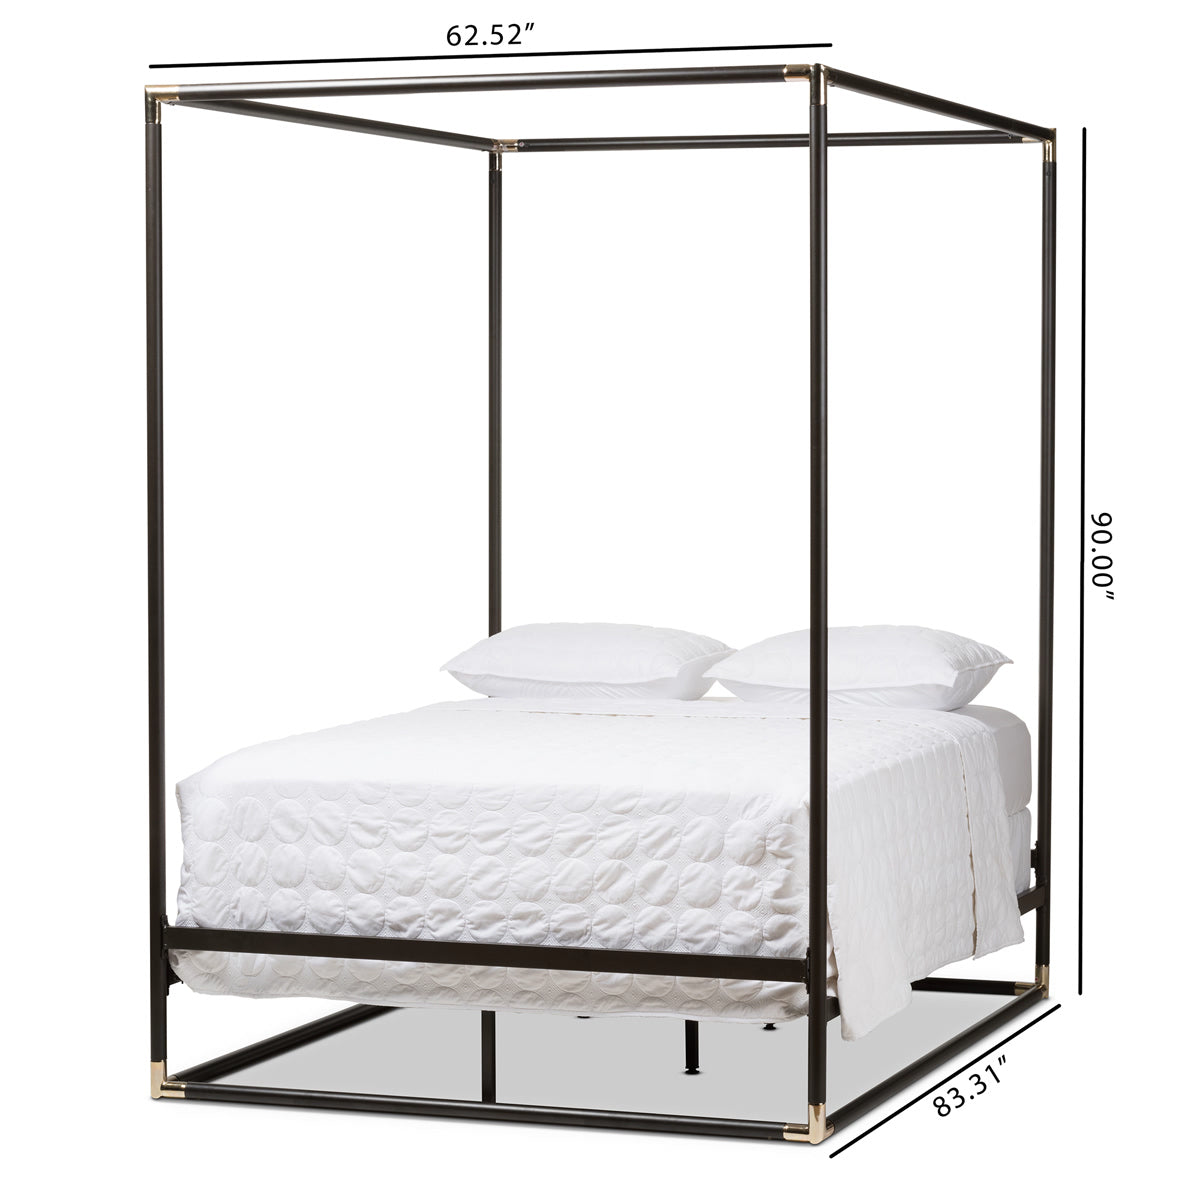 Baxton Studio Eva Vintage Industrial Black Finished Metal Canopy Queen Bed Baxton Studio-Queen Bed-Minimal And Modern - 7